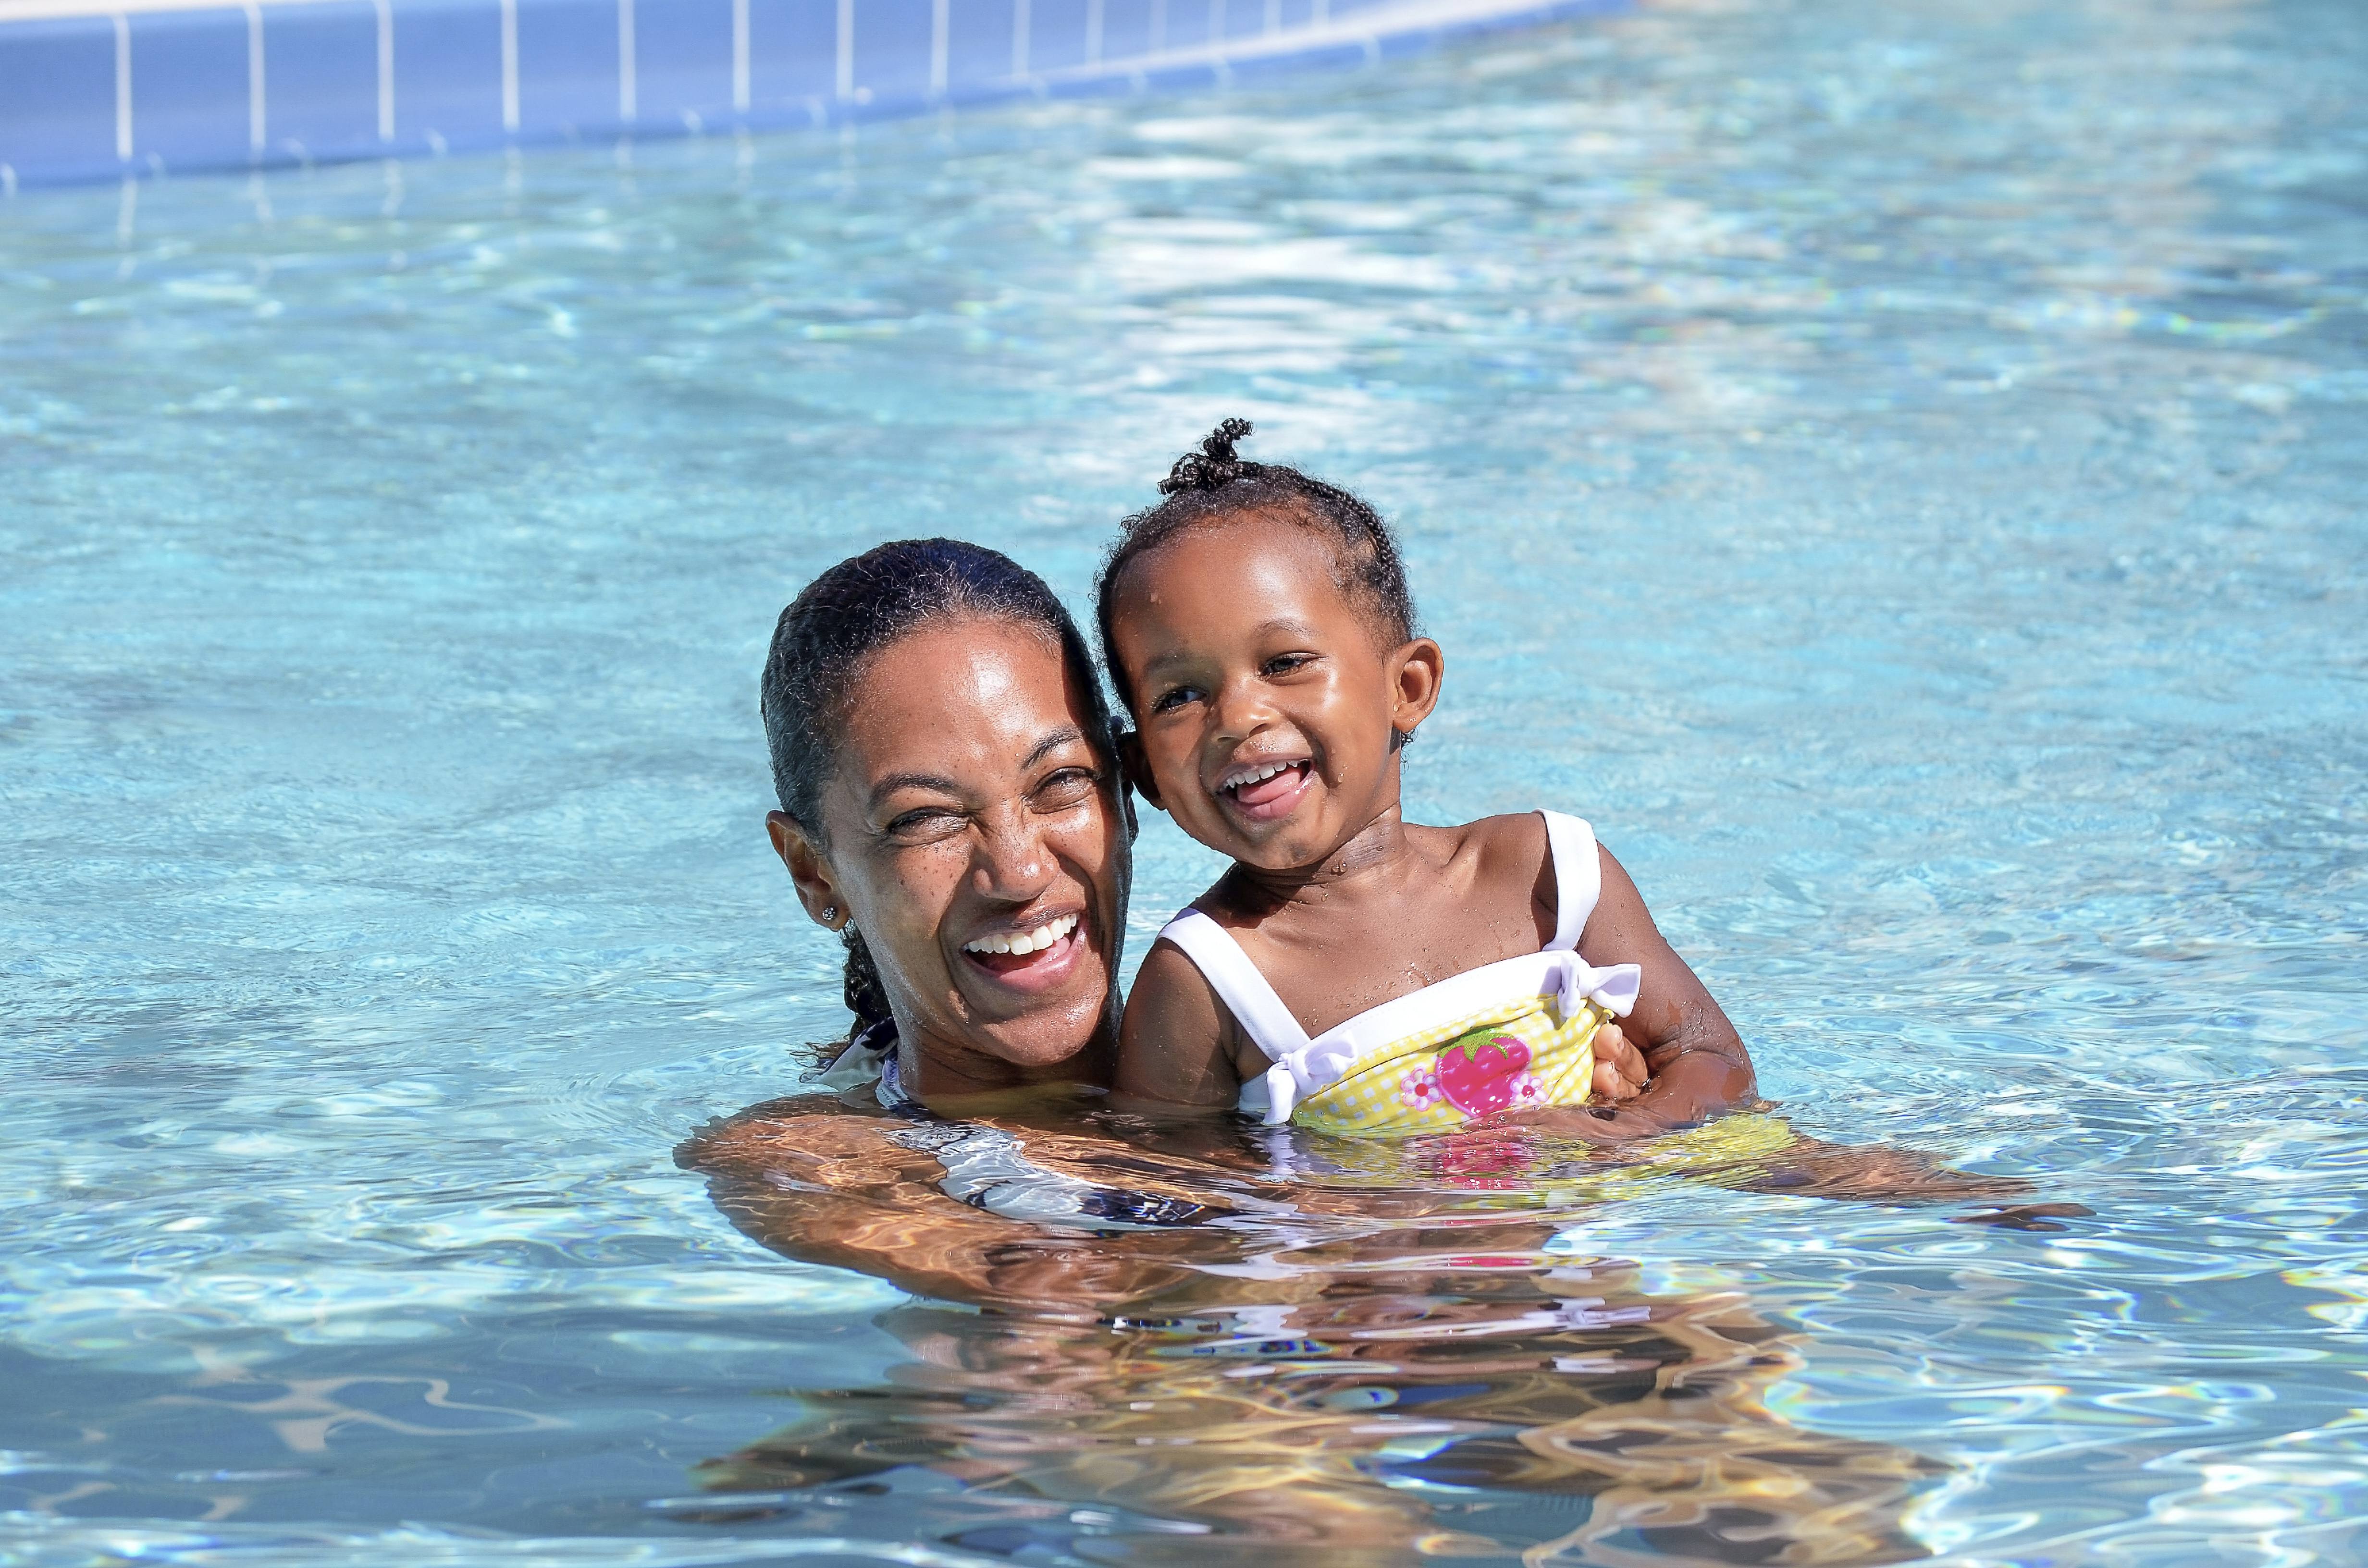 a little girl smiling as a woman, perhaps her mother, holds her in the water of a swimming pool - diversity